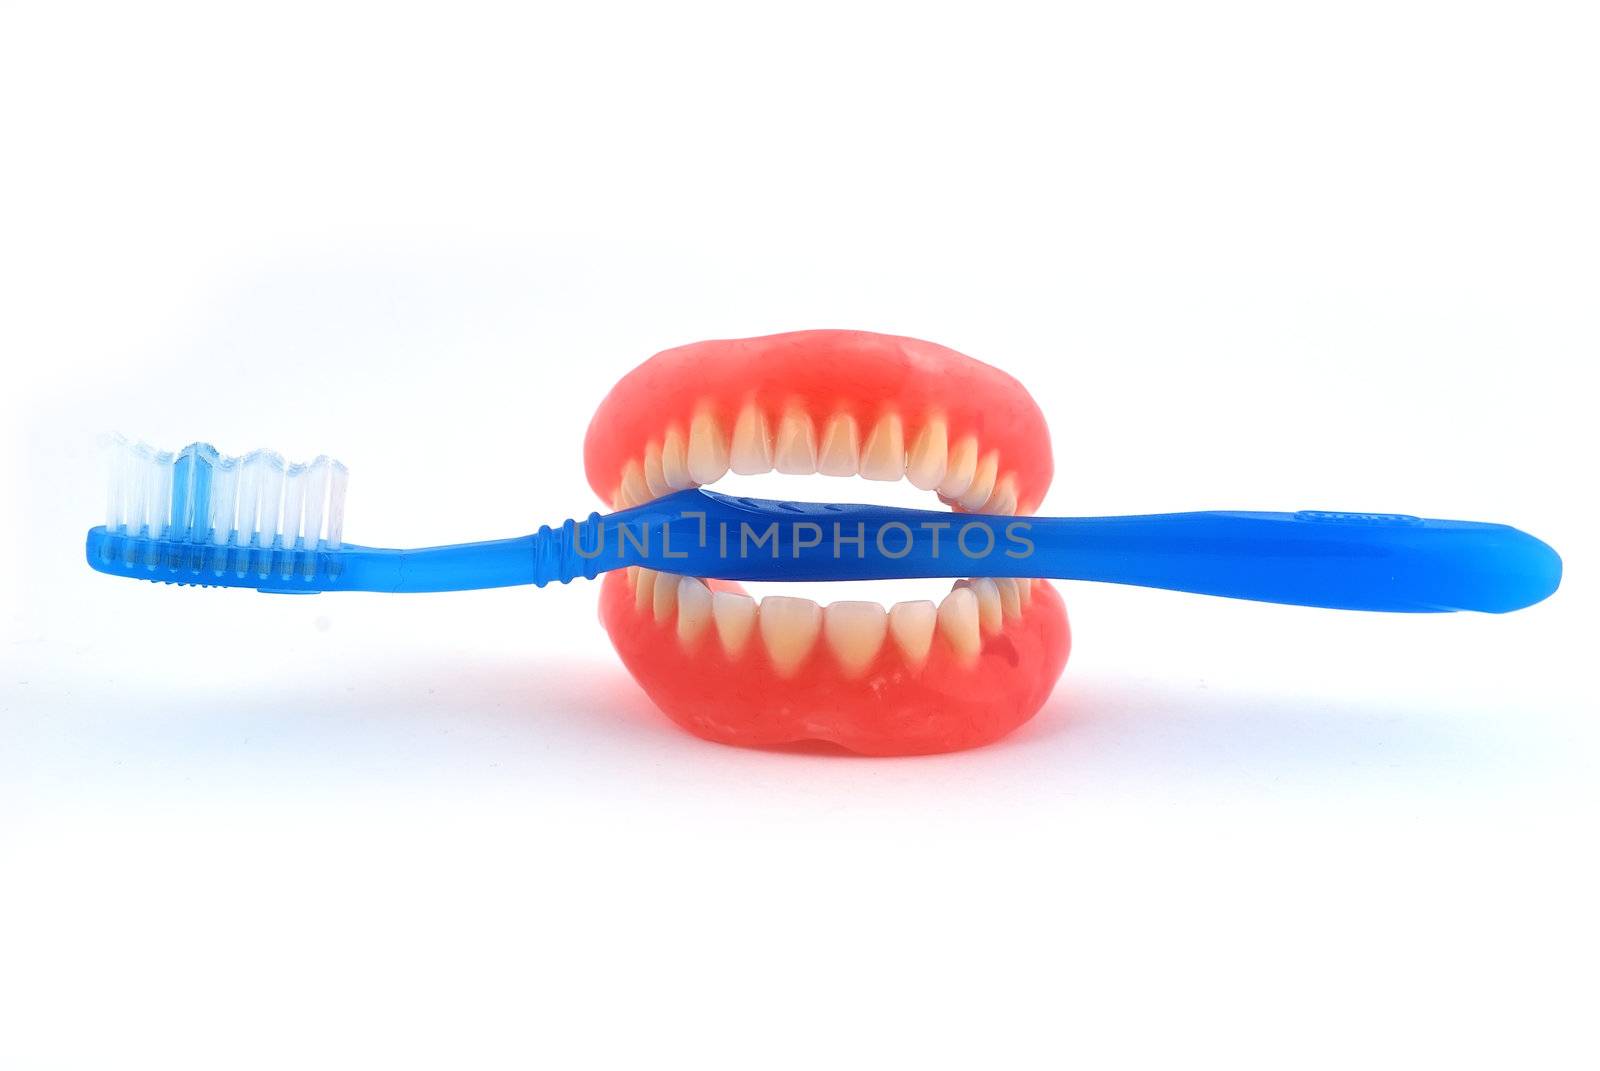 dentures and toothbrush by vetkit